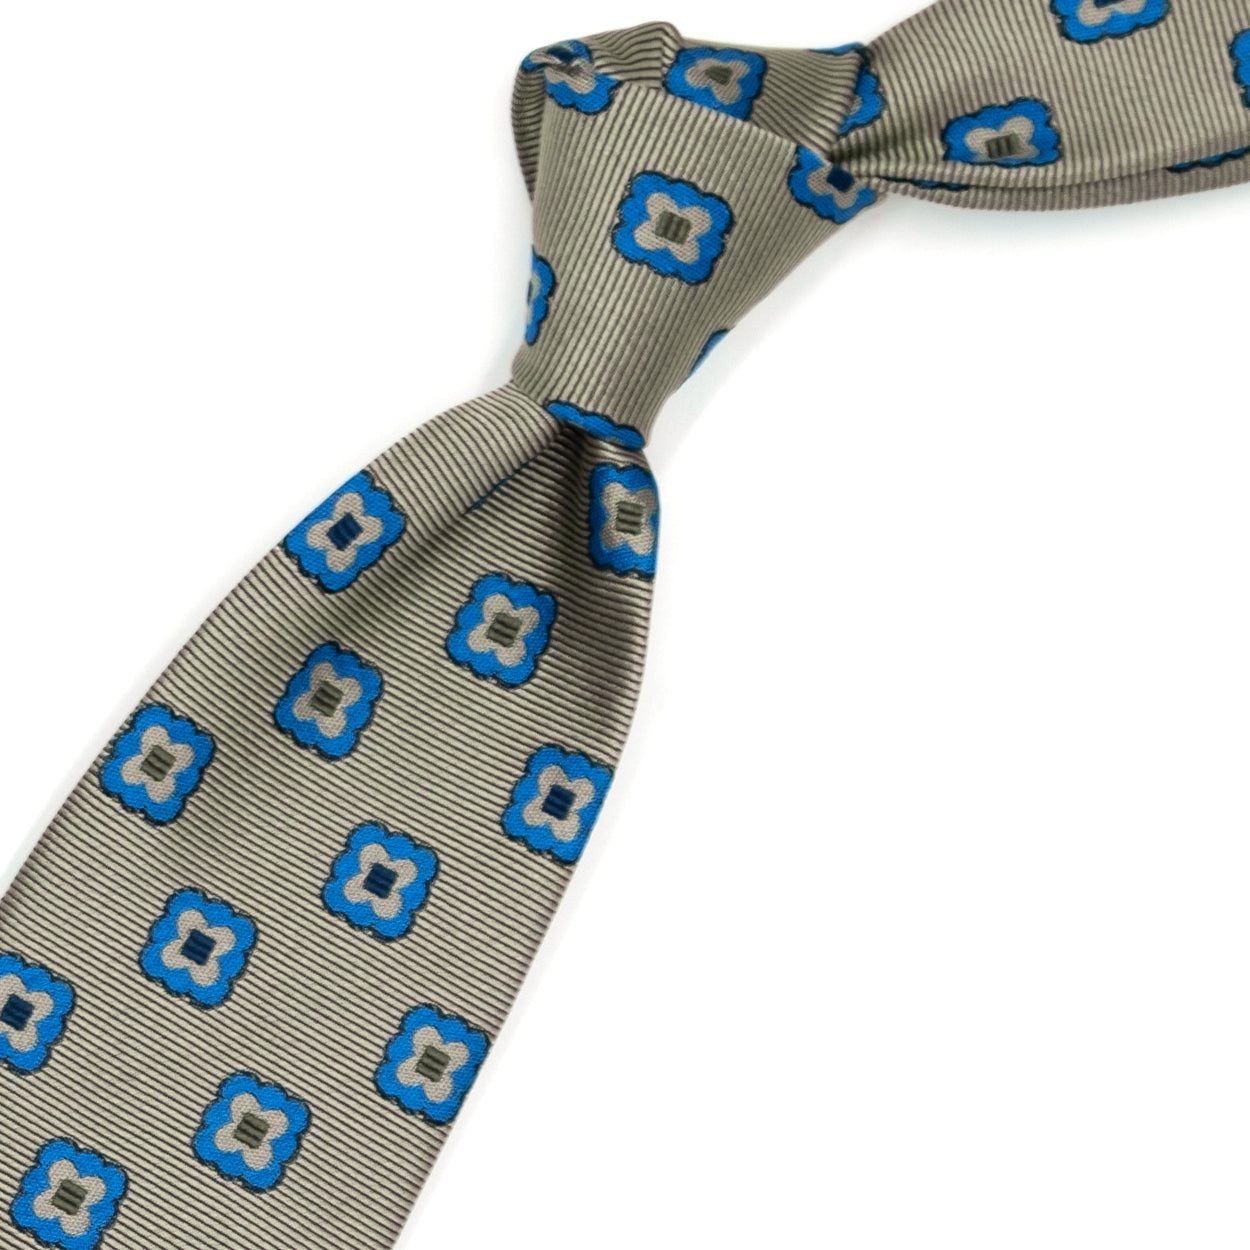 Beige tie with blue flowers and brown squares